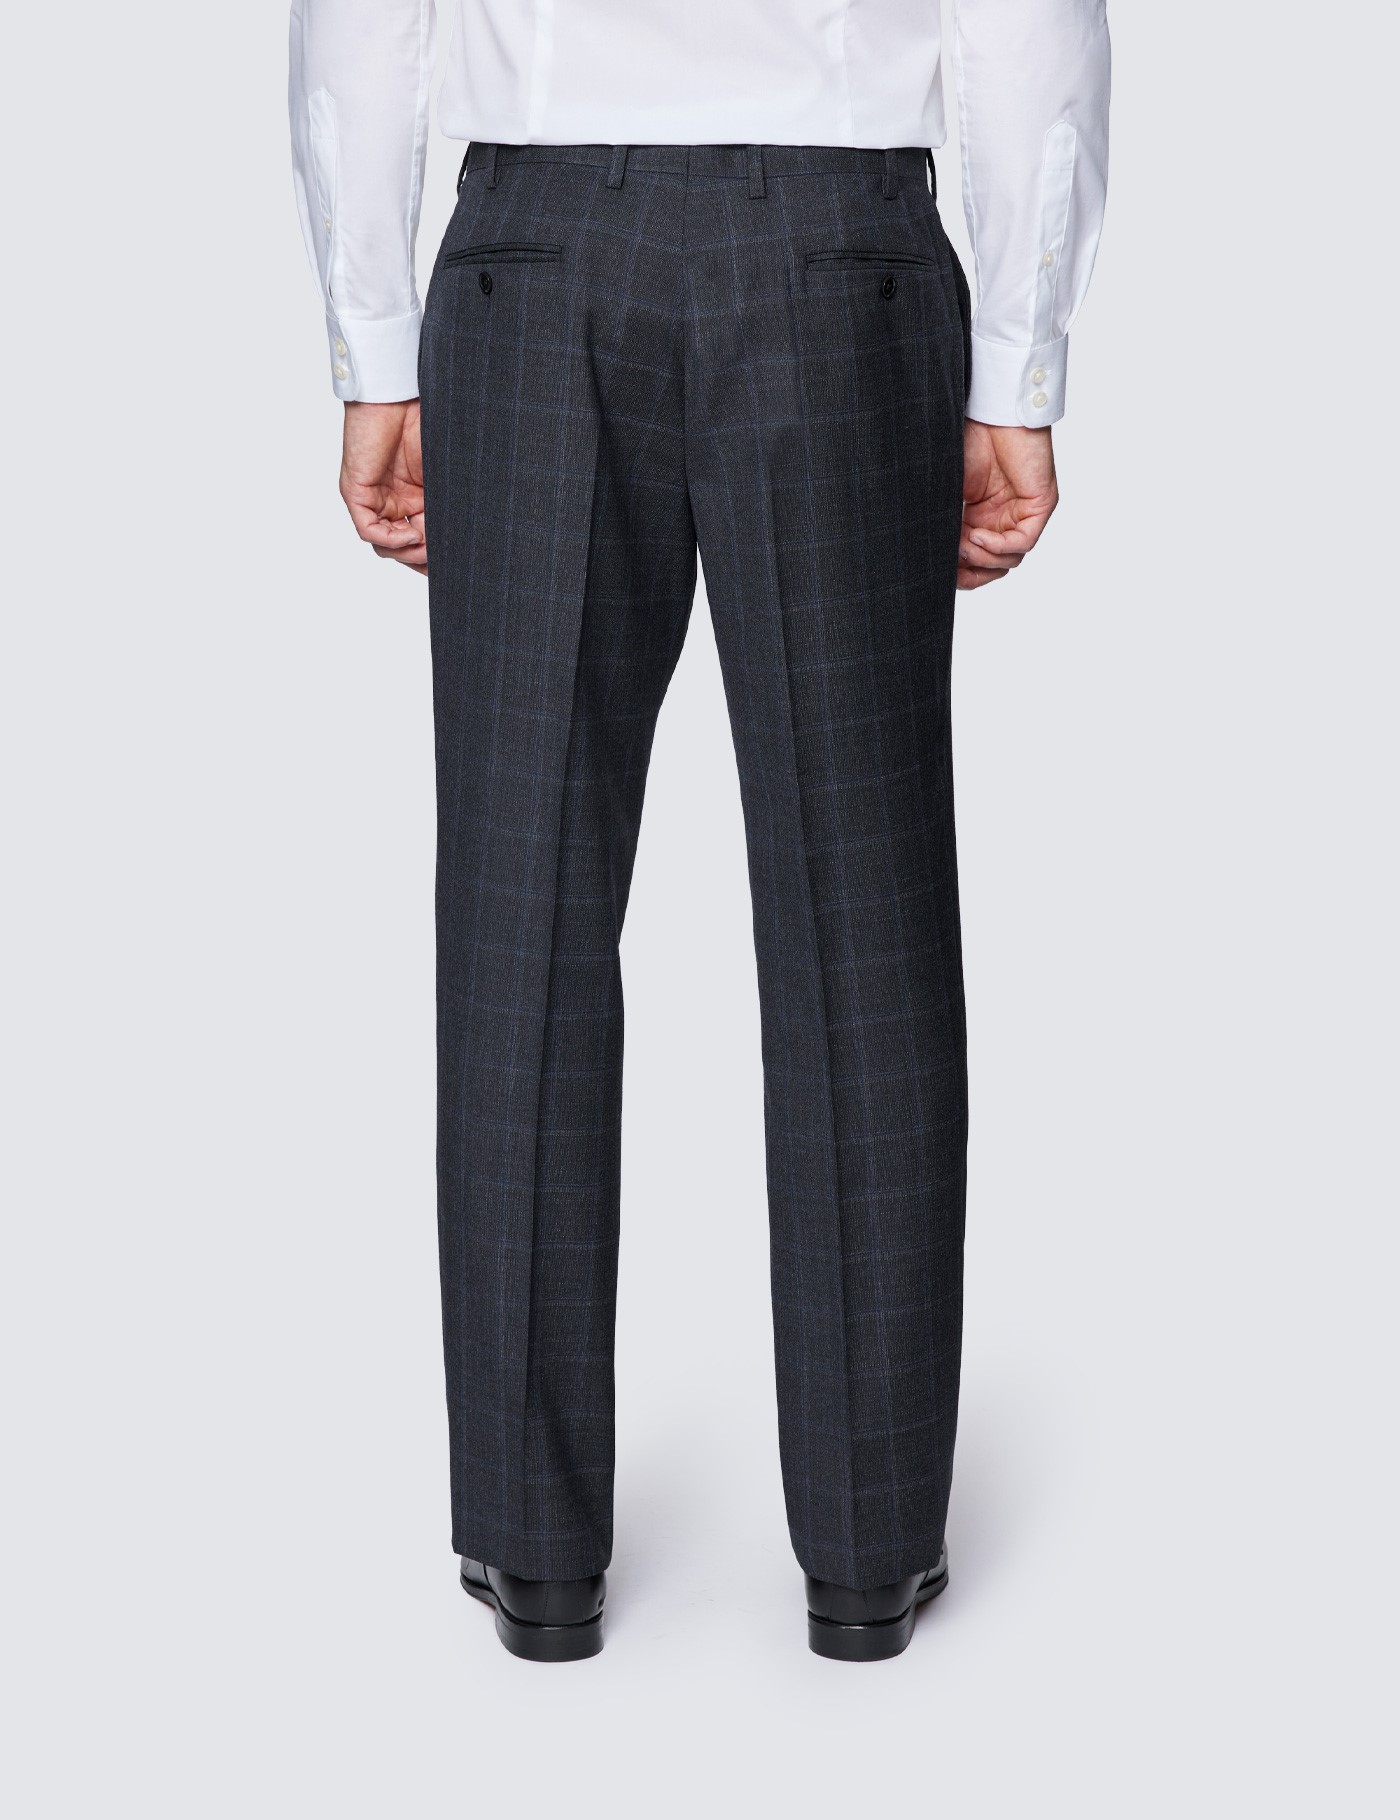 Men's Charcoal & Blue Windowpane Check Classic Fit Suit | Hawes & Curtis